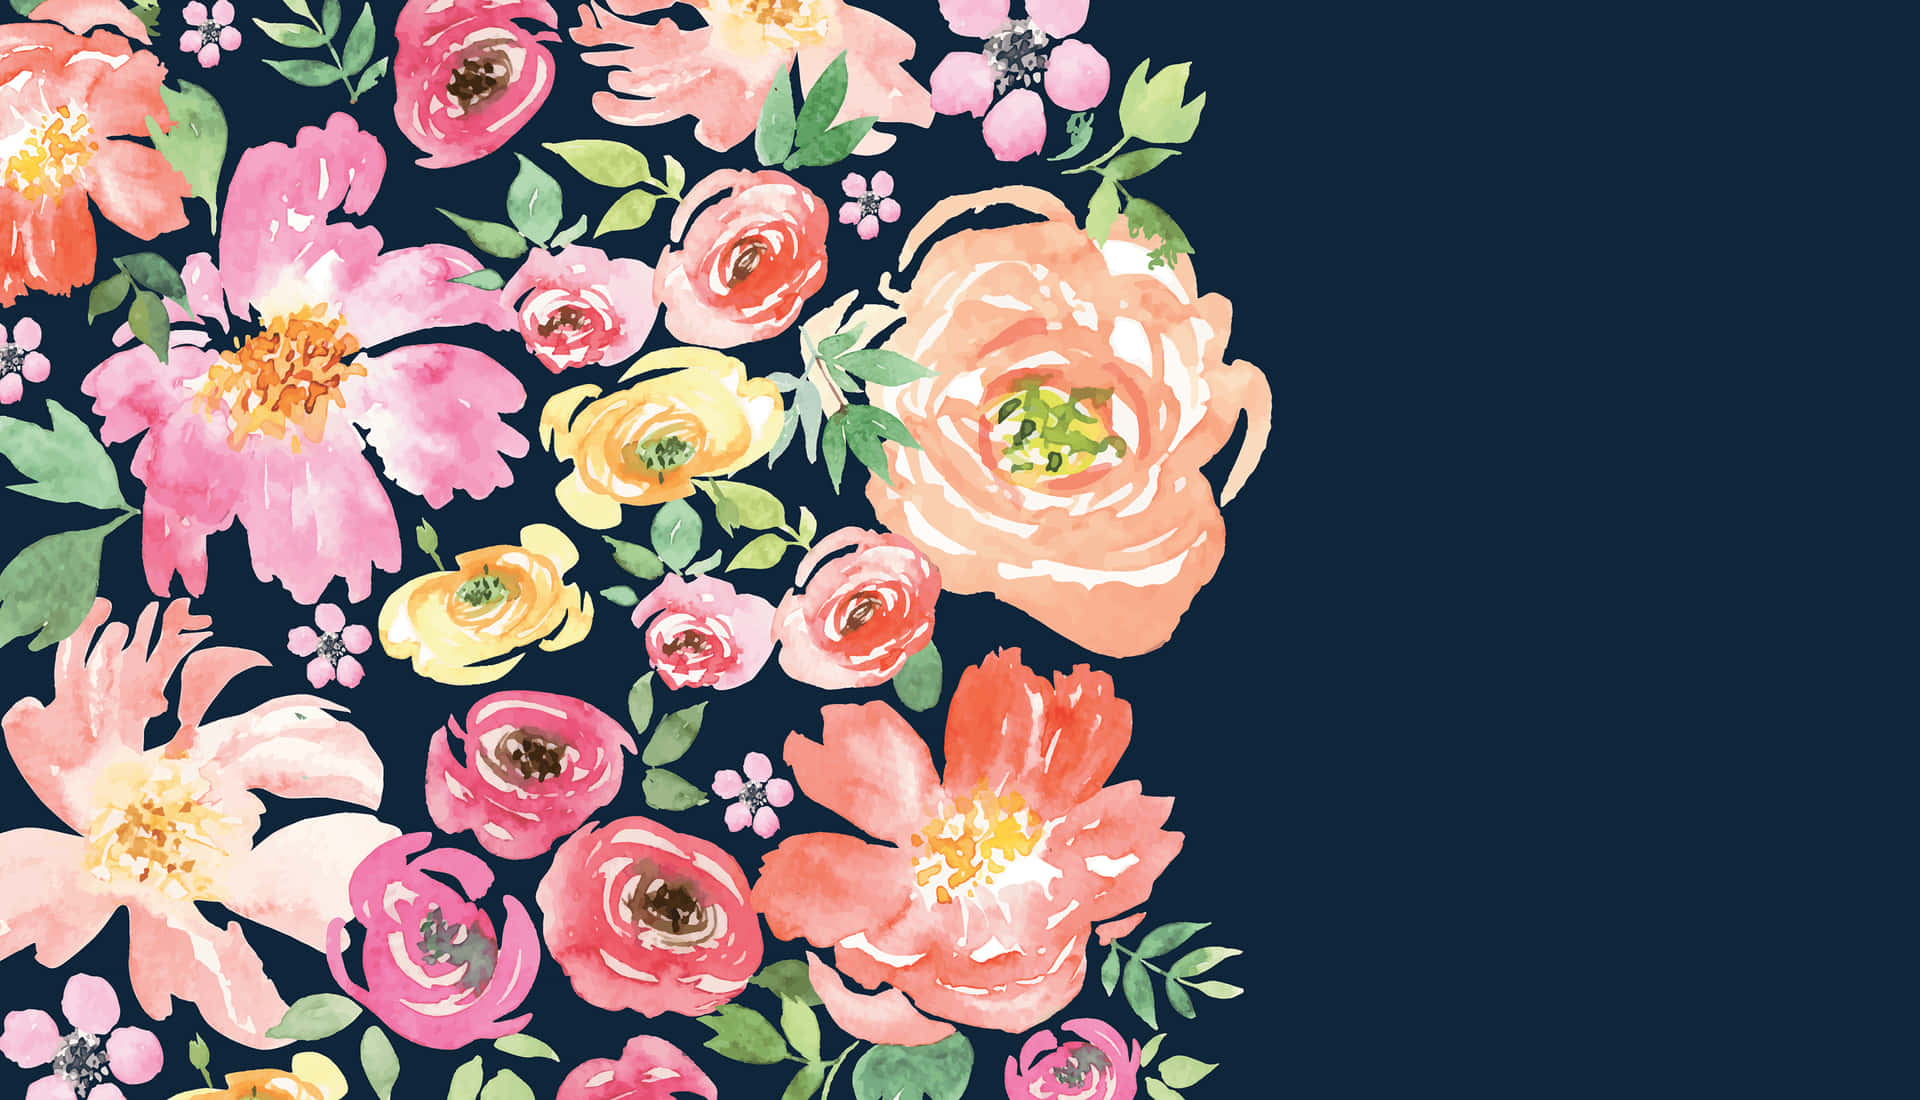 A Watercolor Floral Border On A Navy Background